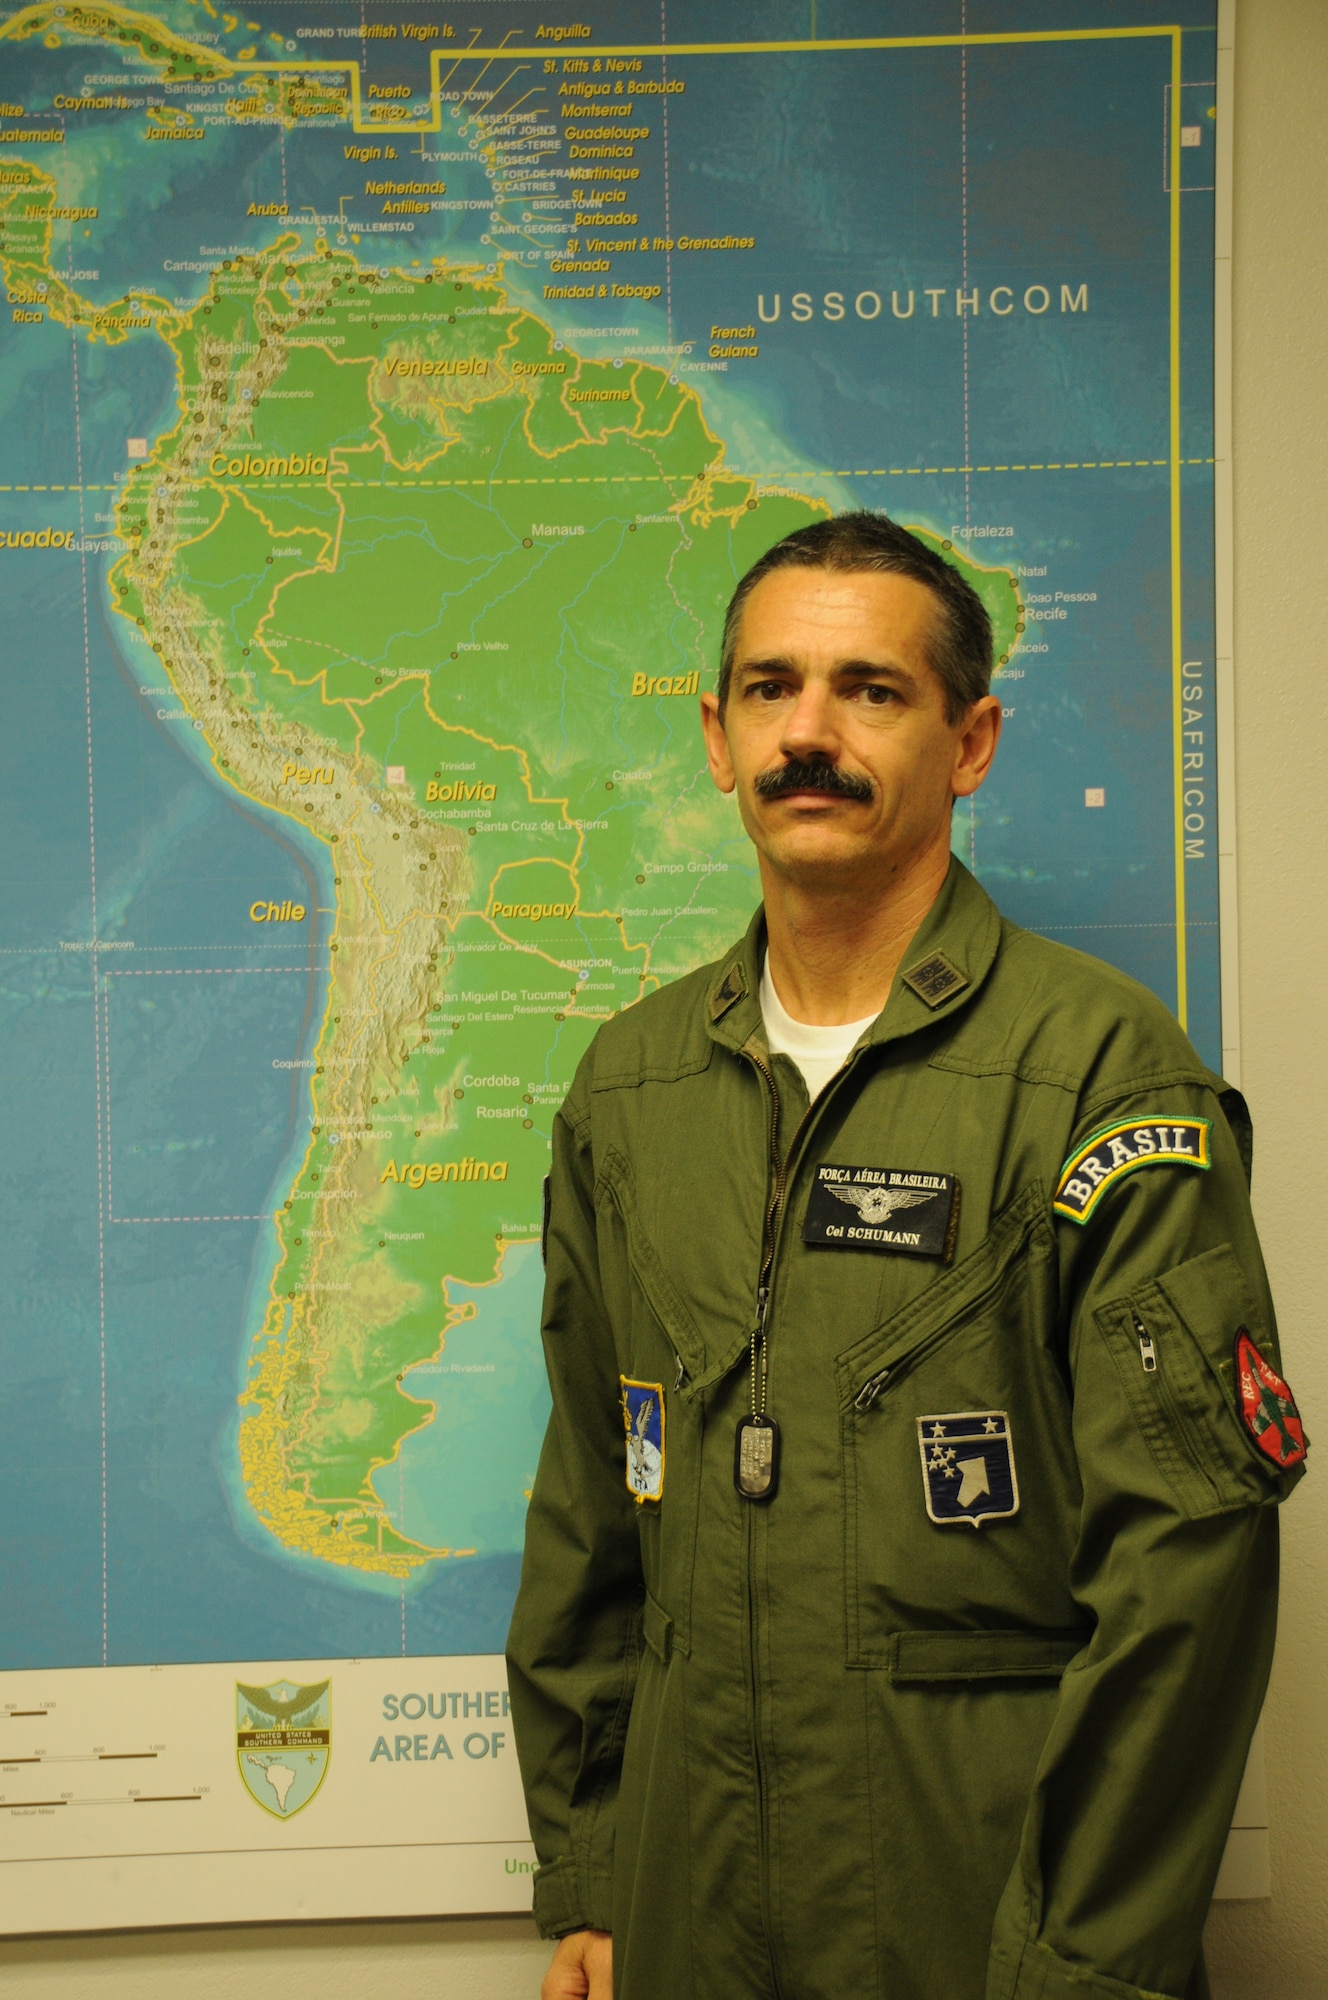 DAVIS-MONTHAN AIR FORCE BASE, Ariz. –  Col. Schumann, a fighter pilot in the Brazilian air force,  worked as a chief of combat operations during PANAMAX 2012 alongside Air Forces Southern, Aug. 6-17.  PANAMAX is an annual U.S. Southern Command-sponsored exercise that focuses on ensuring the defense of the Panama Canal. One of the most important benefits of multinational exercises like PANAMAX is the fact that all the participants were able to exchange their experiences, expertise gained new knowledge about each other's culture and people. These interactions strengthen our bonds across the region and foster long-lasting friendships and an understanding among the partner nations, ultimately benefiting the security of the region. (USAF photo by Tech. Sgt. Andria Sapp). 